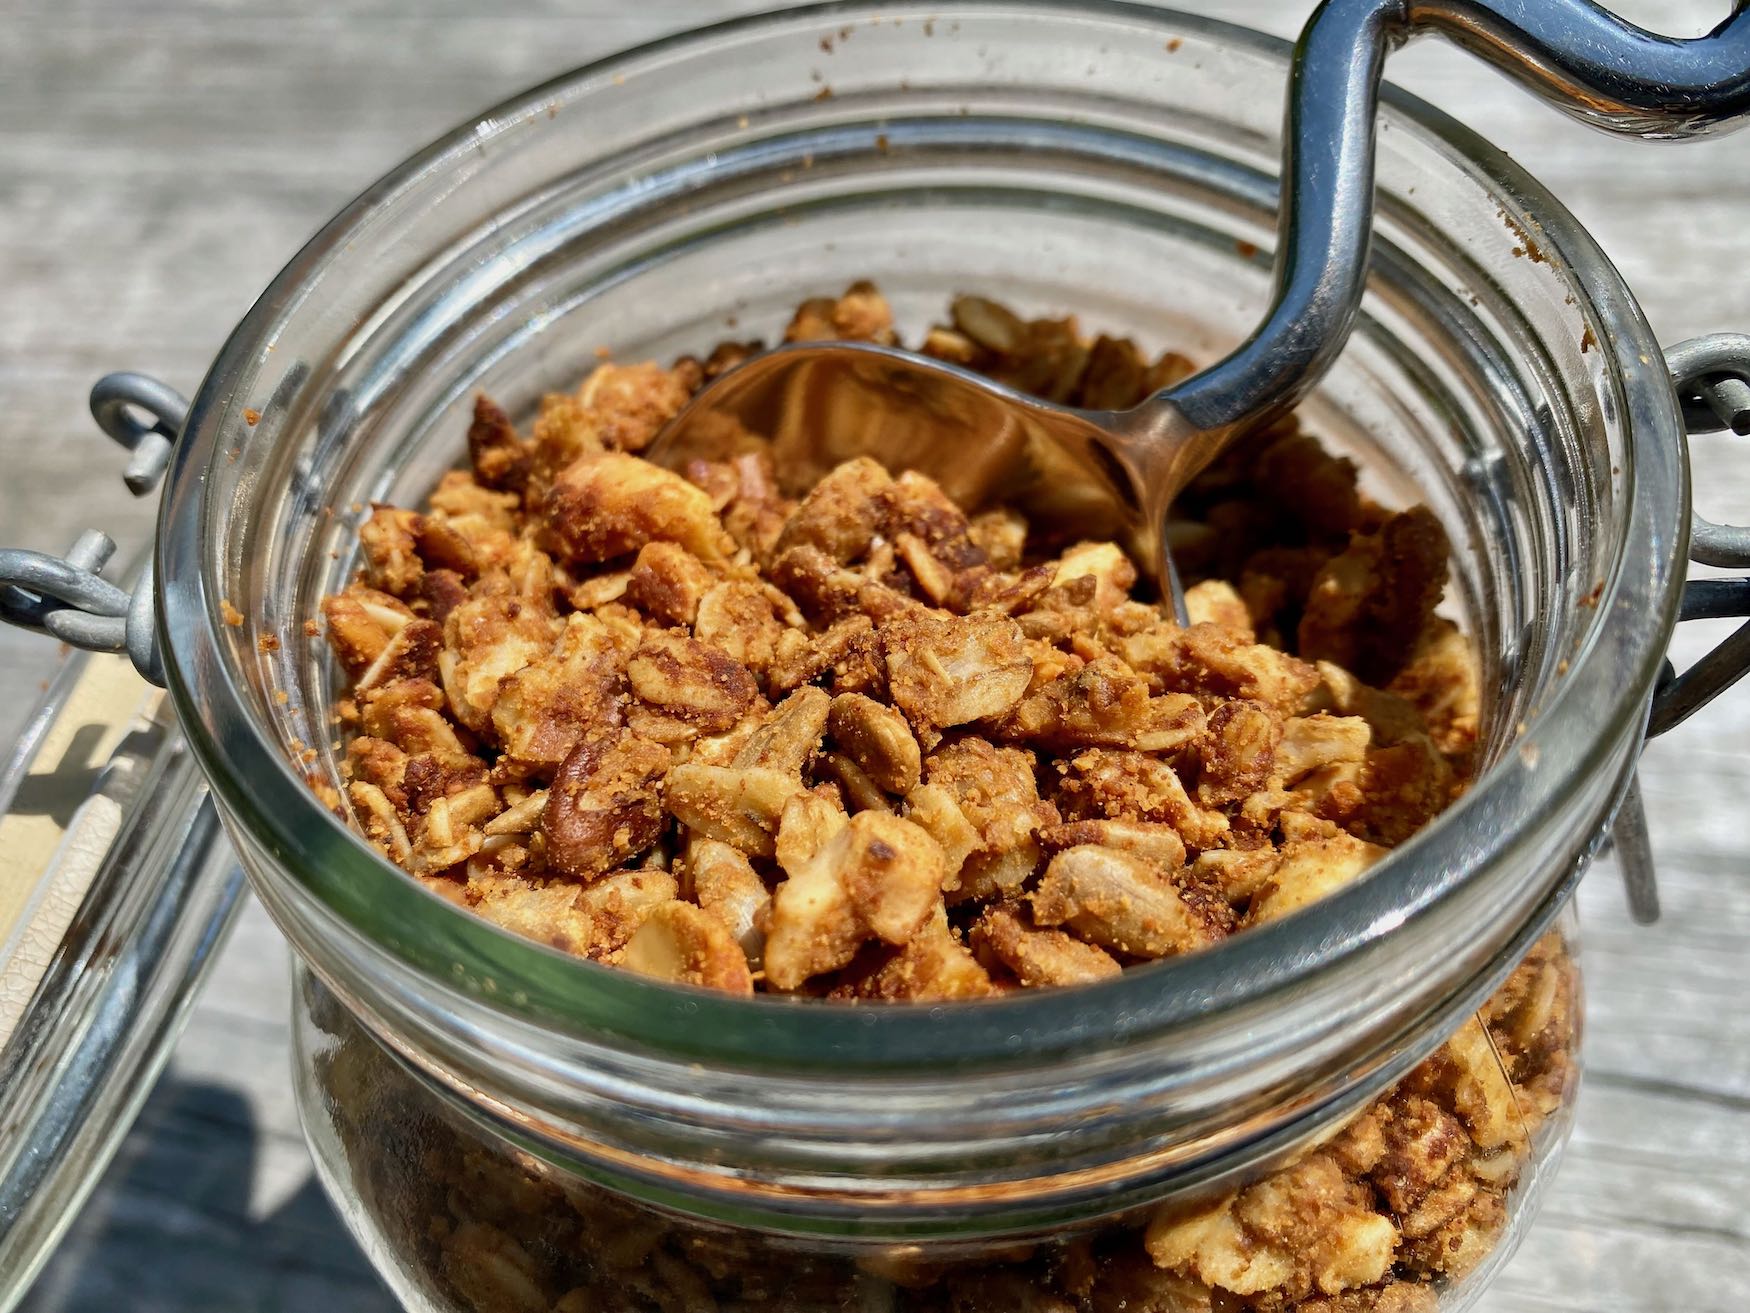 Jar of Smoky Nut and Oat Crunch